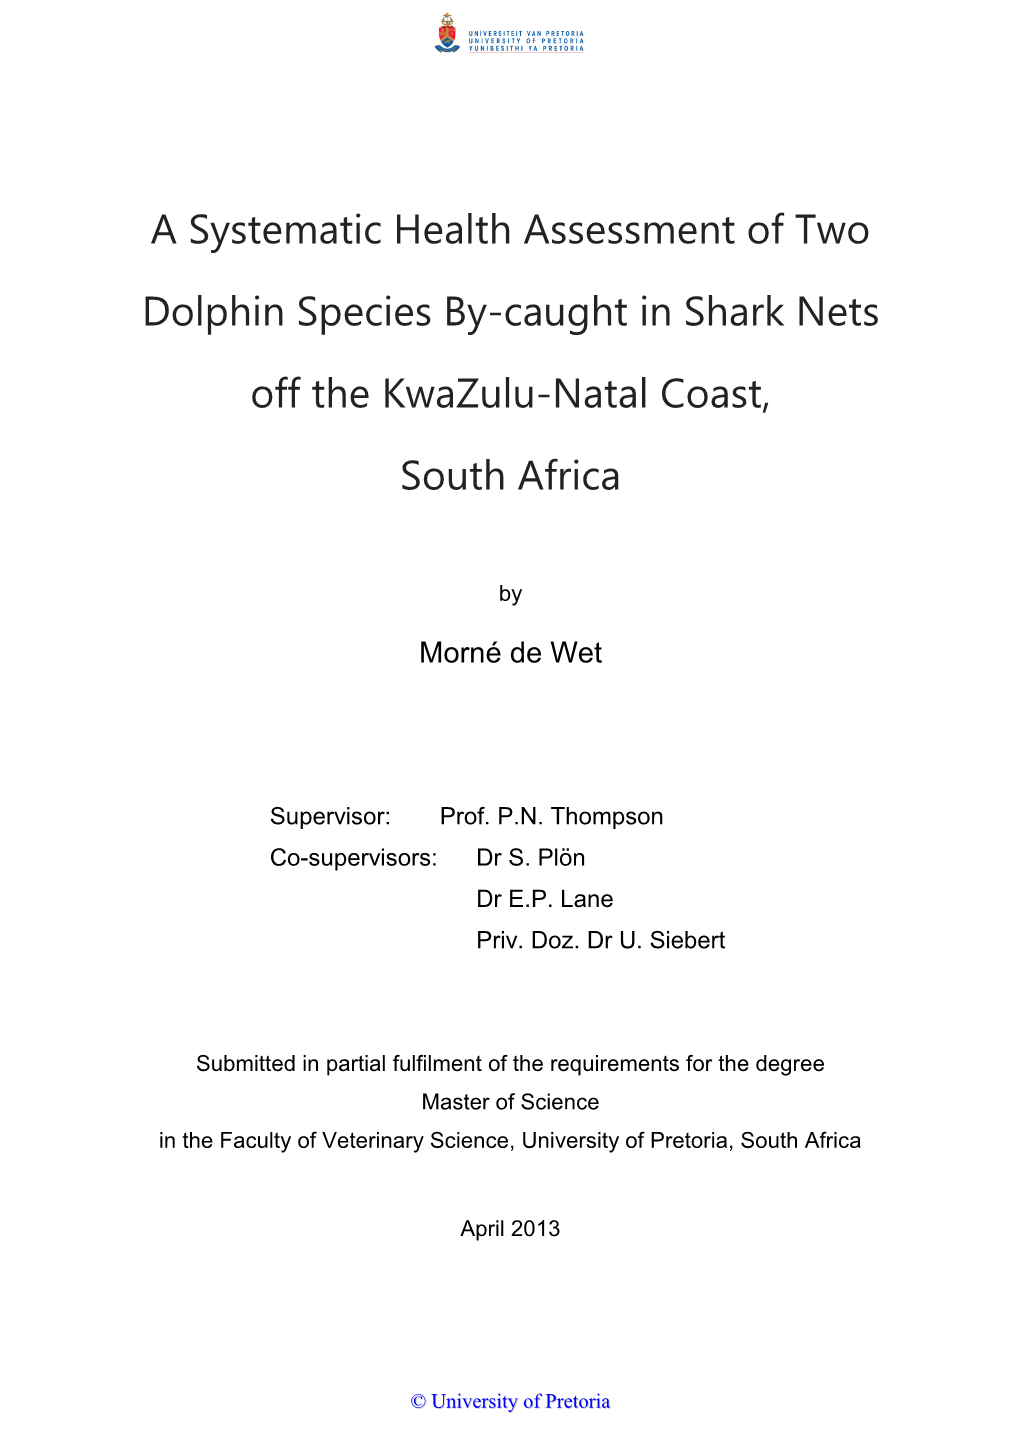 A Systematic Health Assessment of Two Dolphin Species By-Caught in Shark Nets Off the Kwazulu-Natal Coast, South Africa